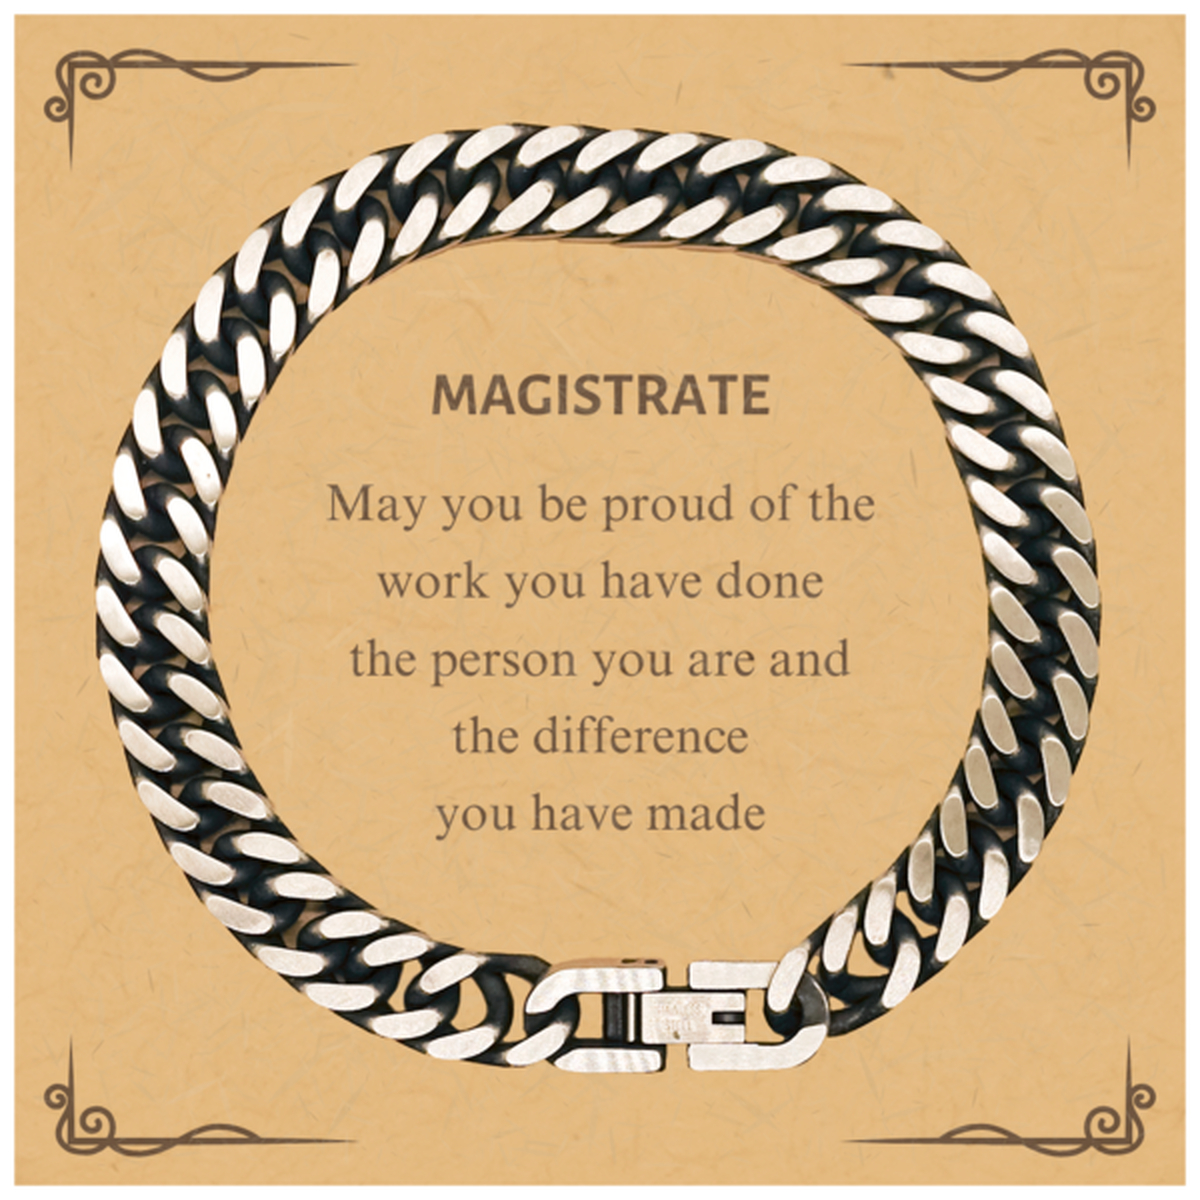 Magistrate May you be proud of the work you have done, Retirement Magistrate Cuban Link Chain Bracelet for Colleague Appreciation Gifts Amazing for Magistrate